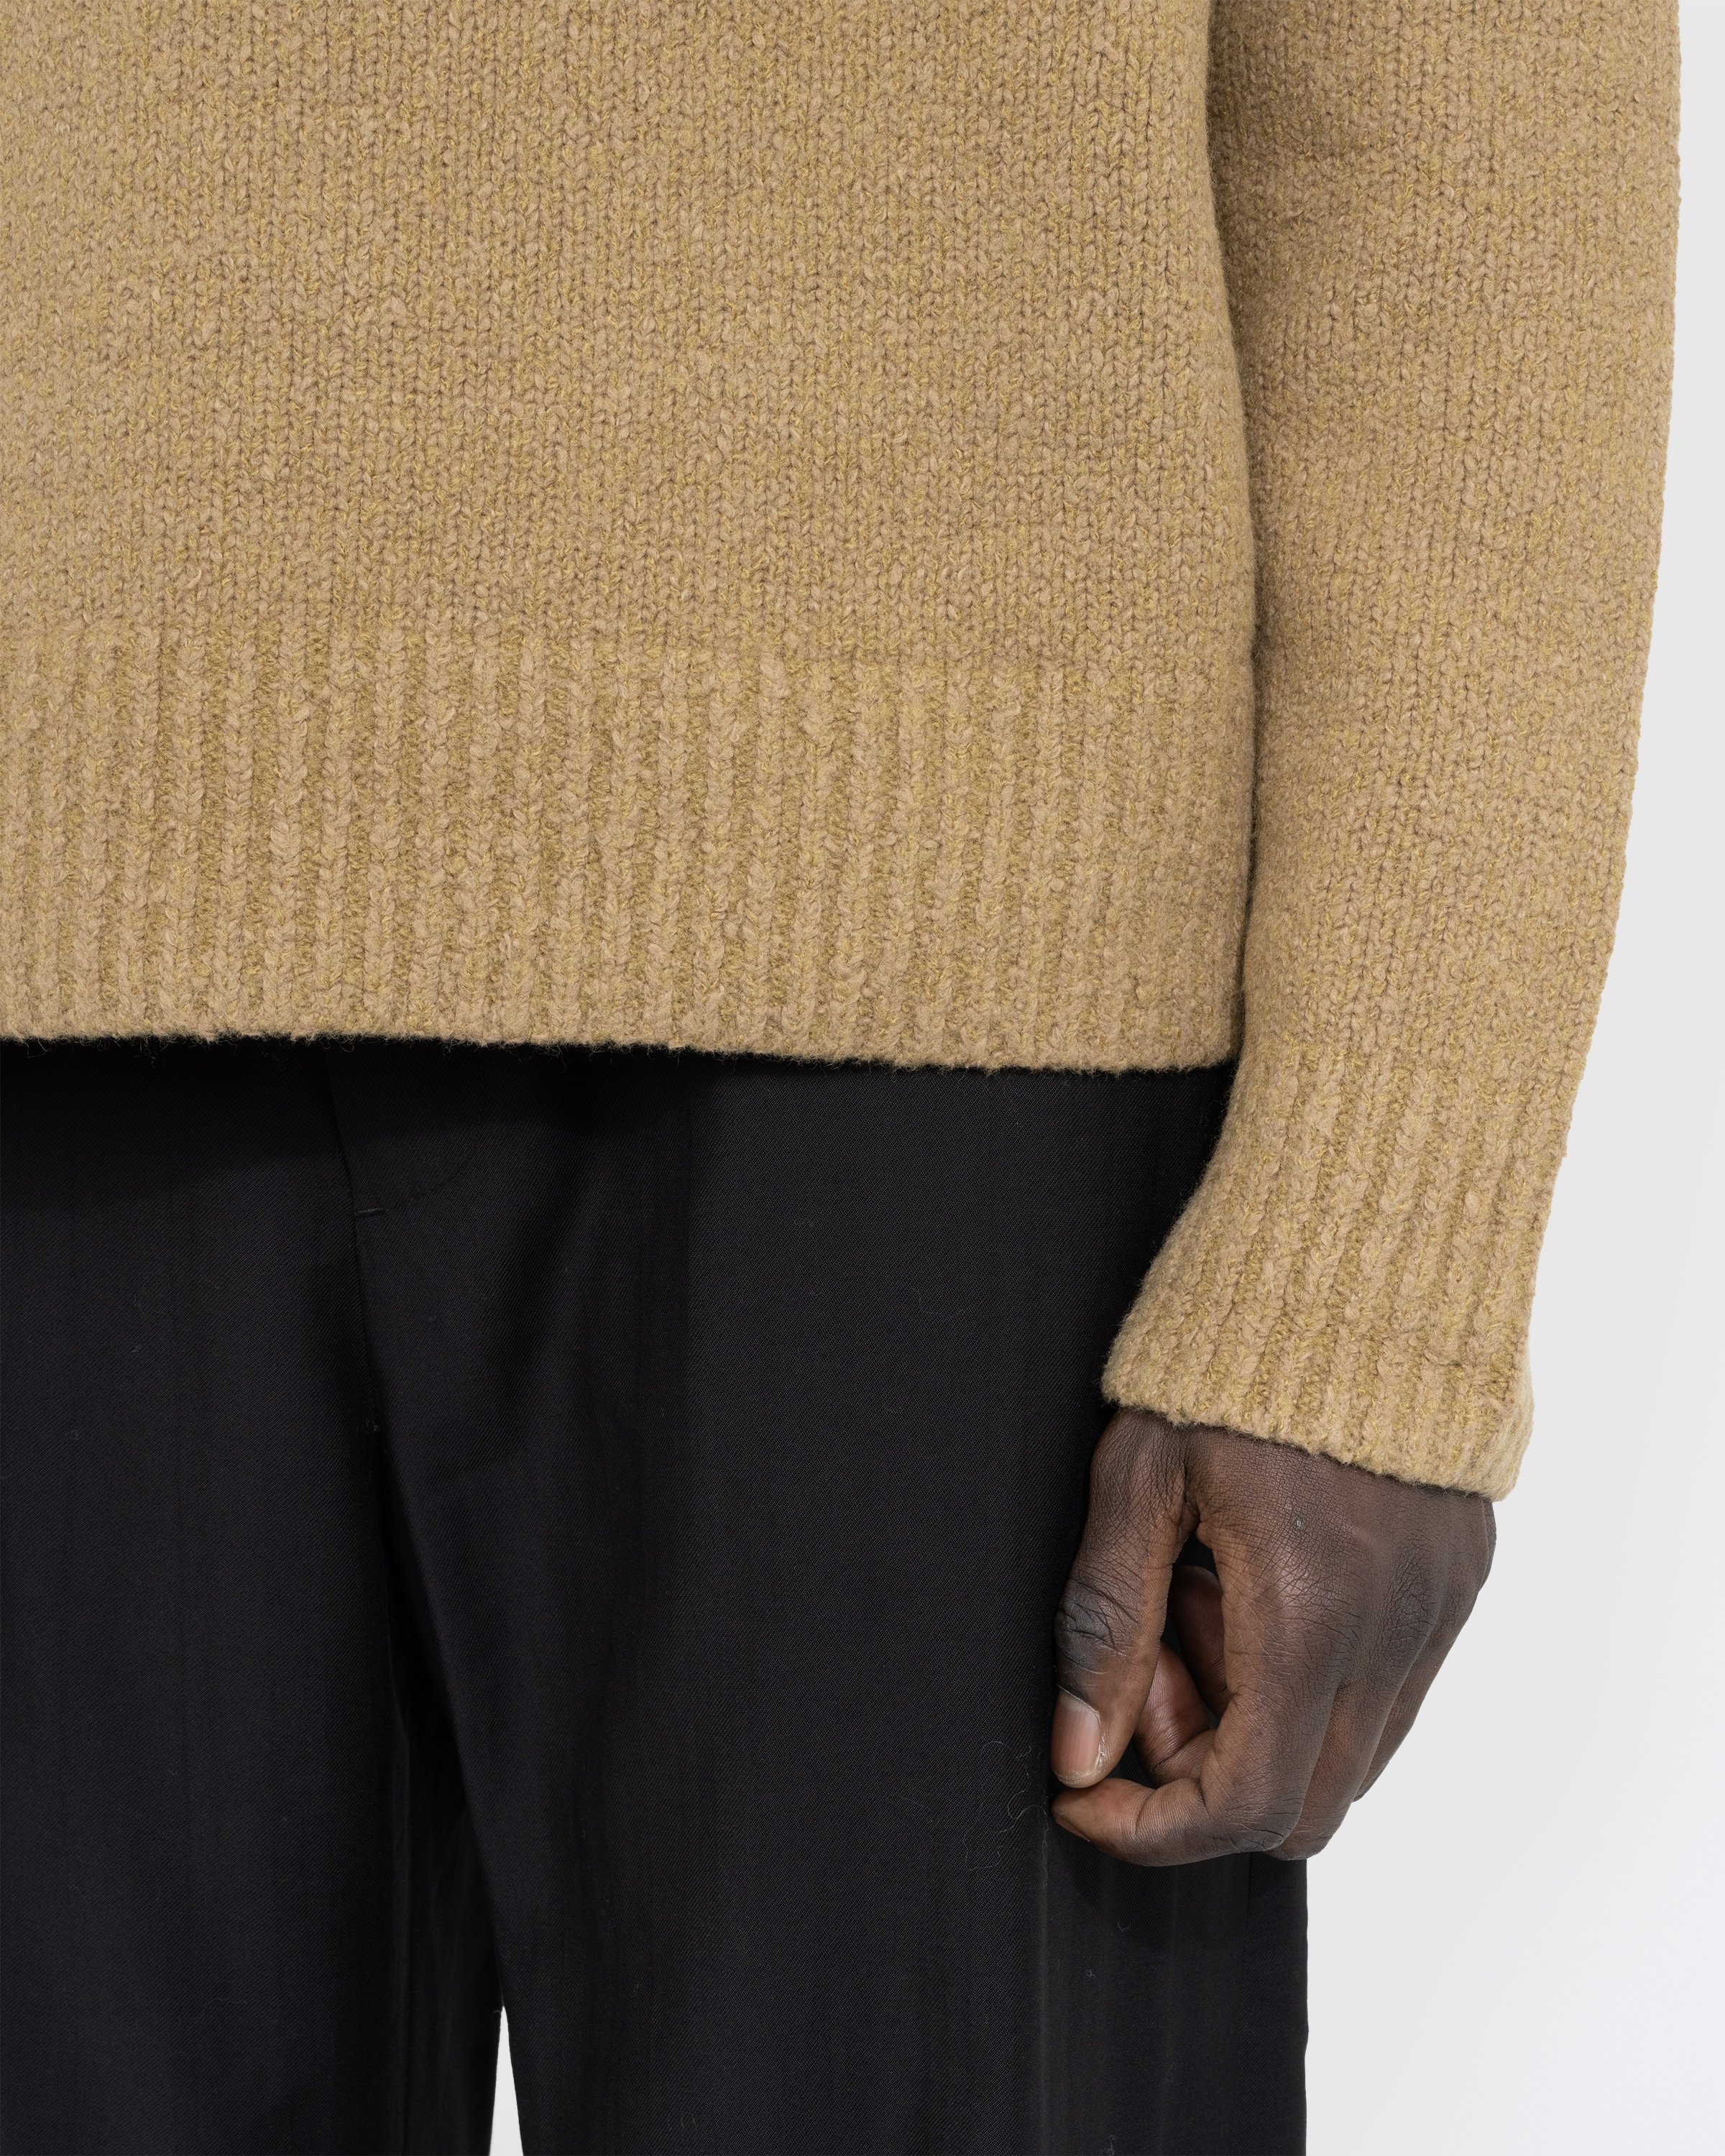 Acne Studios - FN-MN-KNIT000441 - Clothing - Brown - Image 5